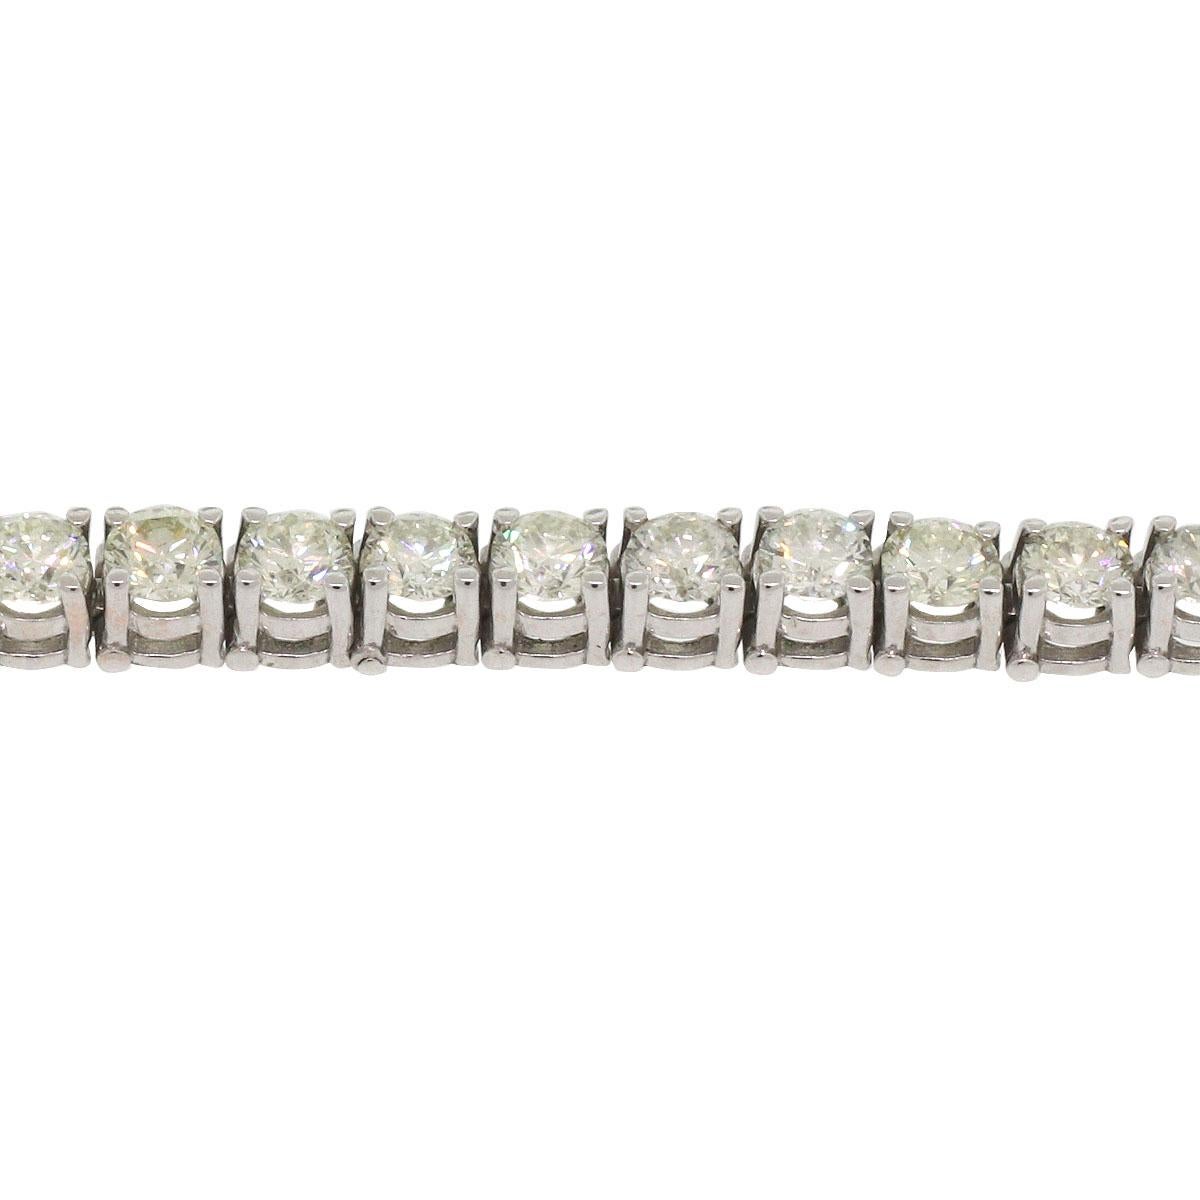 Company: N/A

Style of jewelry: Diamond Tennis bracelet

Material: 14k white gold

Stones: Total of 37 stones approximately 0.25ctw per stone

Dimensions: 7 inches in length

Weight: 19g (12.2dwt)

SKU: I-3108